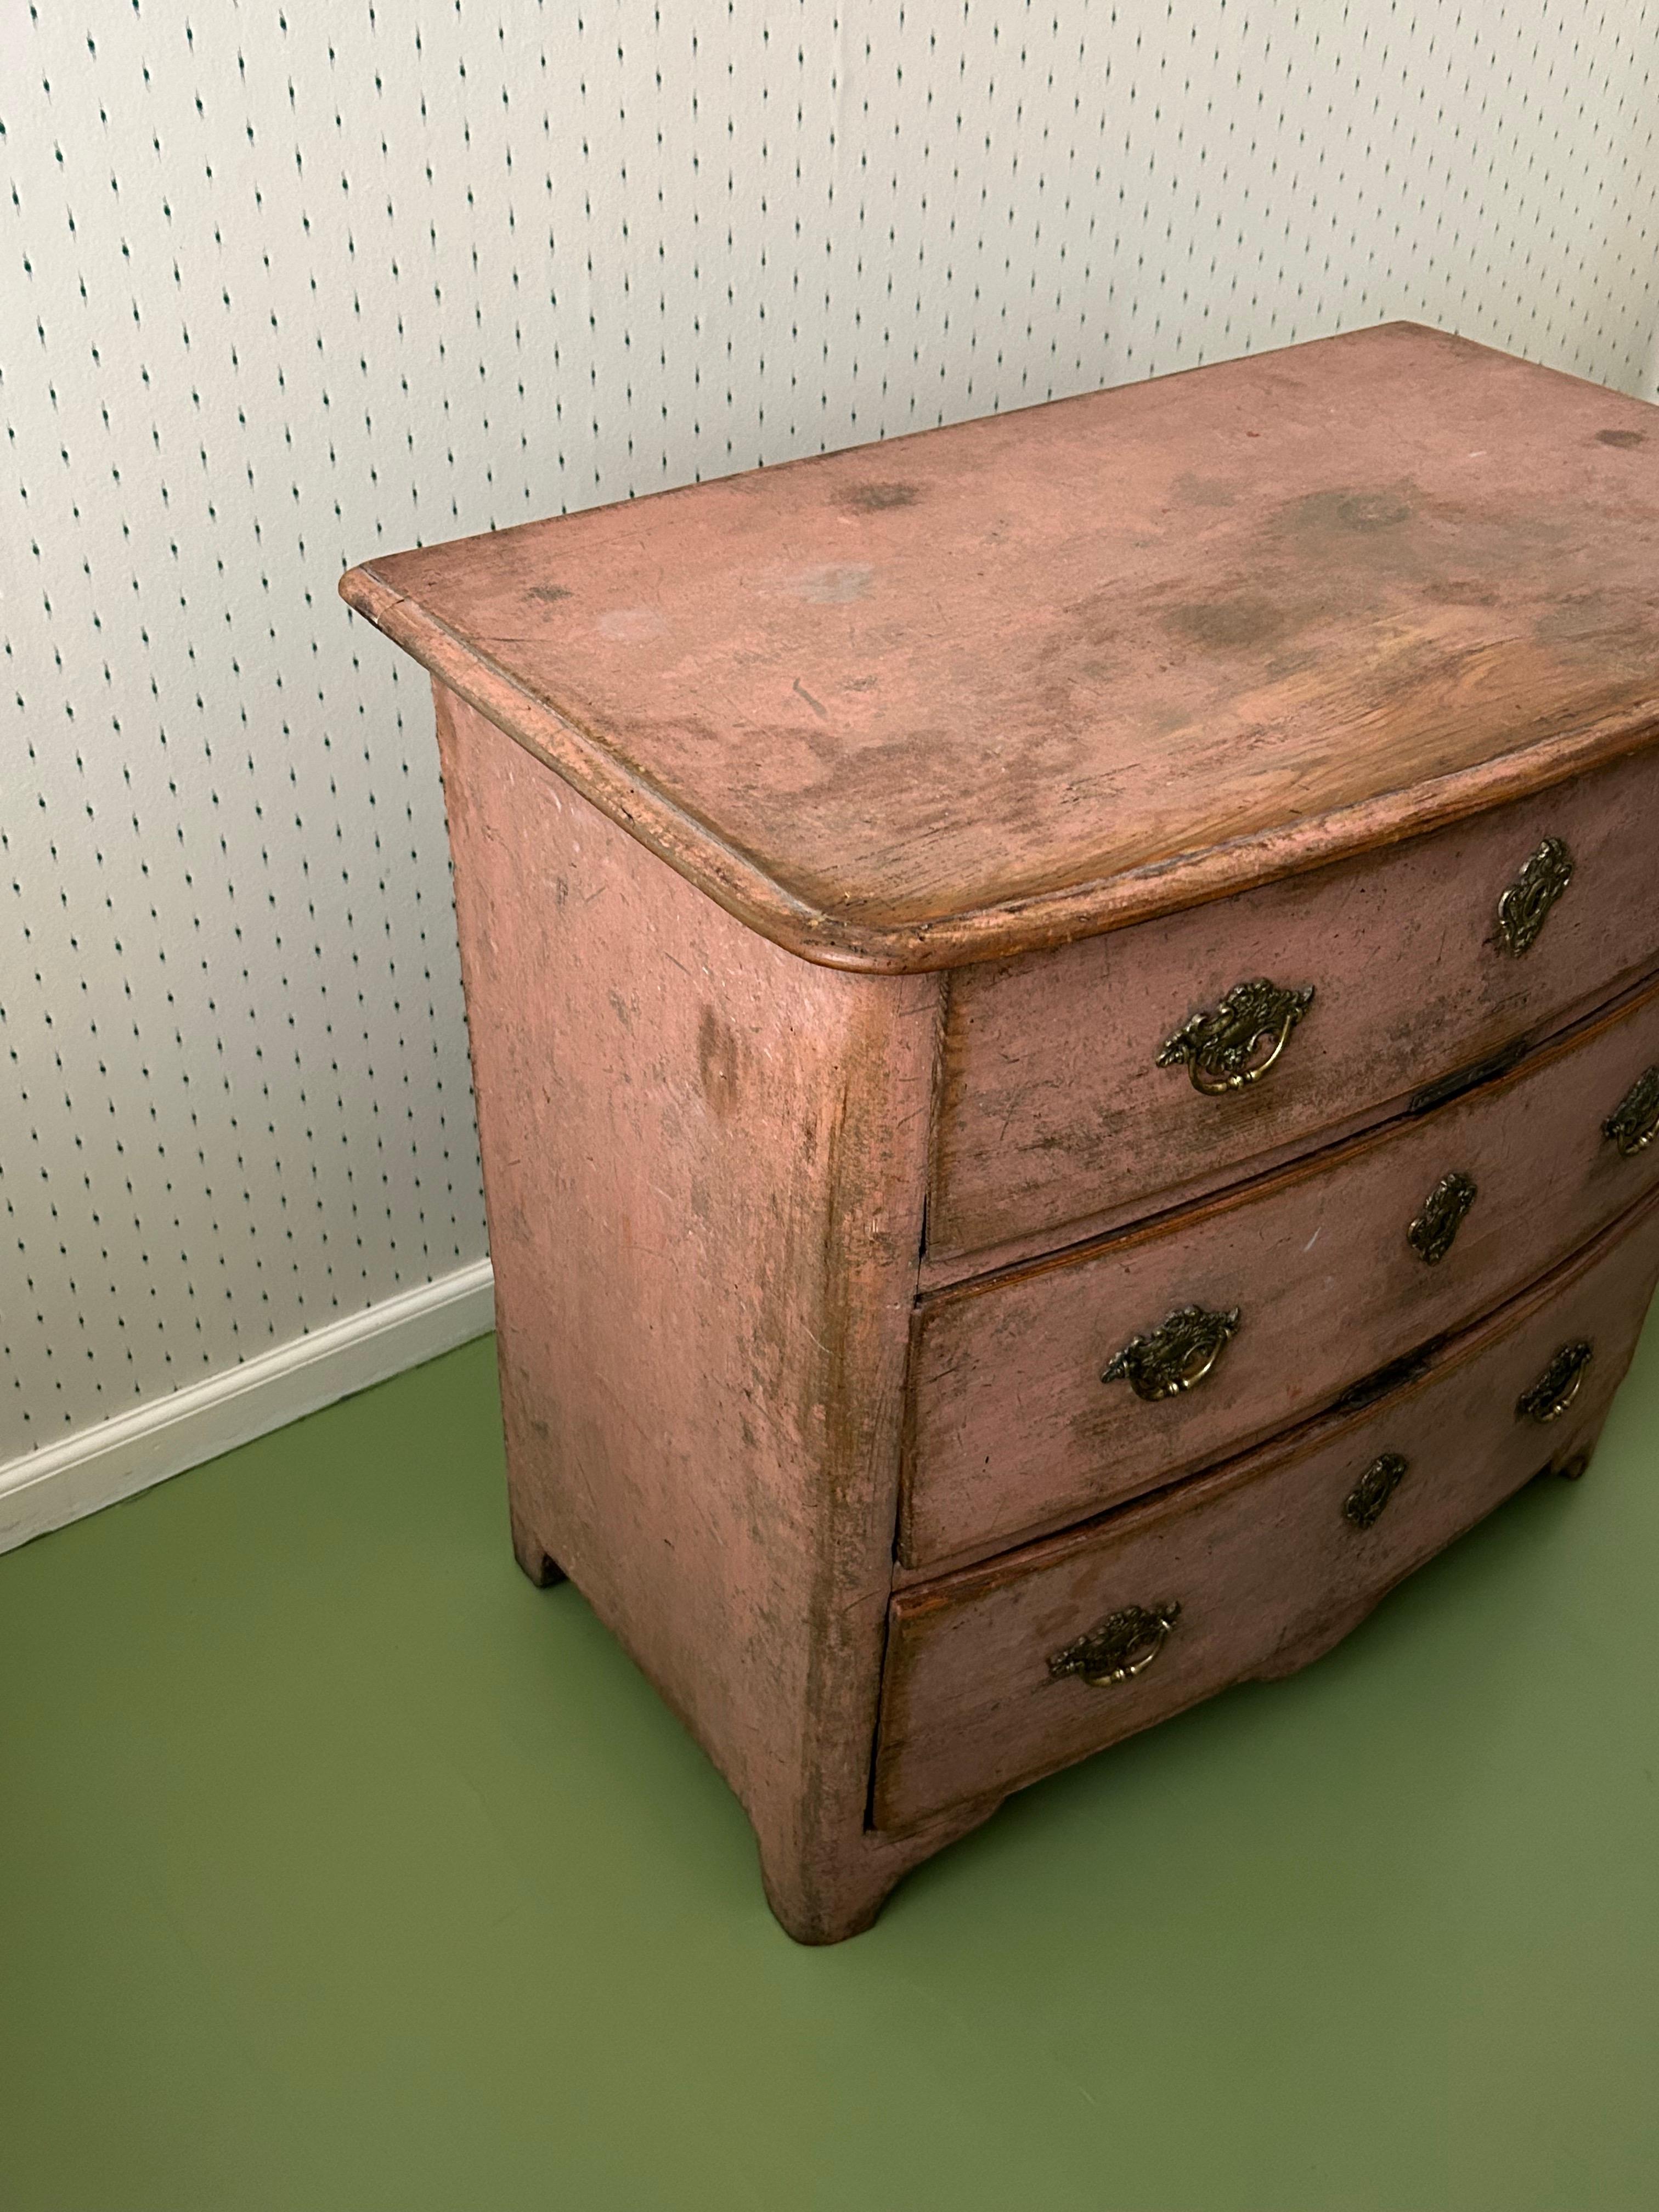  Antique Pink Chest of Drawers in Wood with Original Paint, Sweden, 18th Century For Sale 2